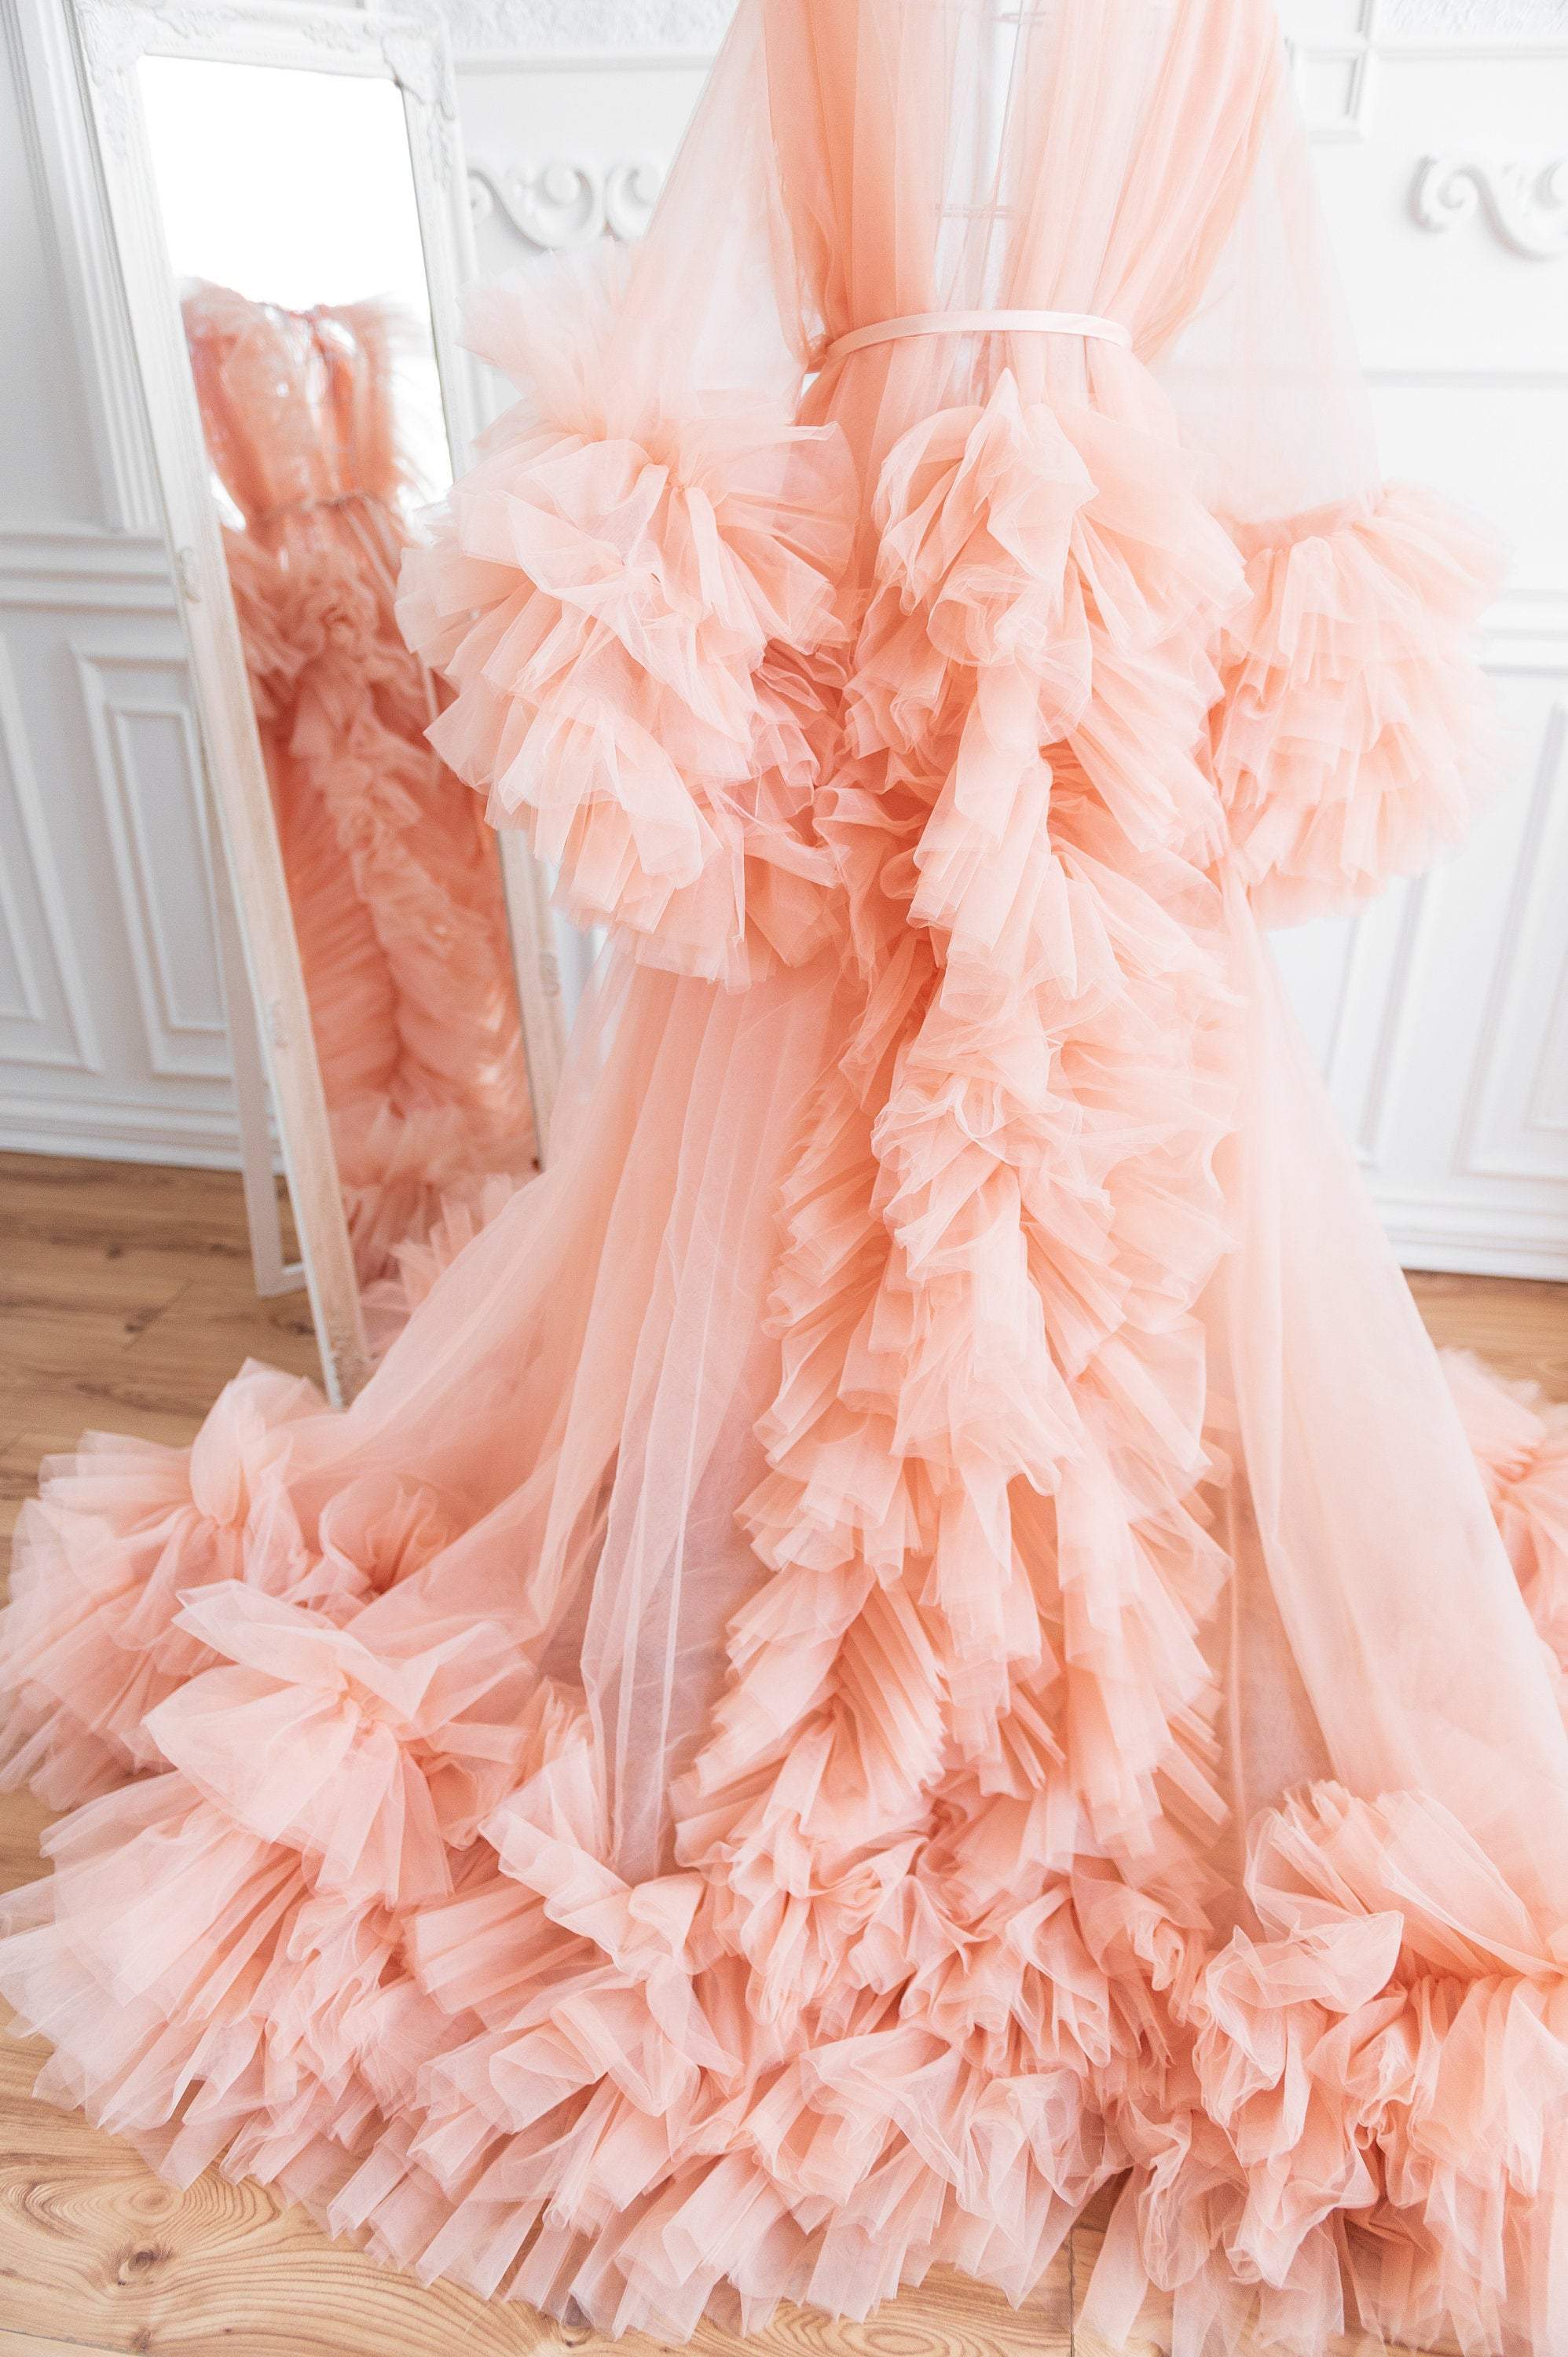 Elegant Sheer Tulle Bridal Robe With Marabou Feather Trim, Illusion Boudoir  Dressing Gown For Wedding From Jiao02, $121.71 | DHgate.Com